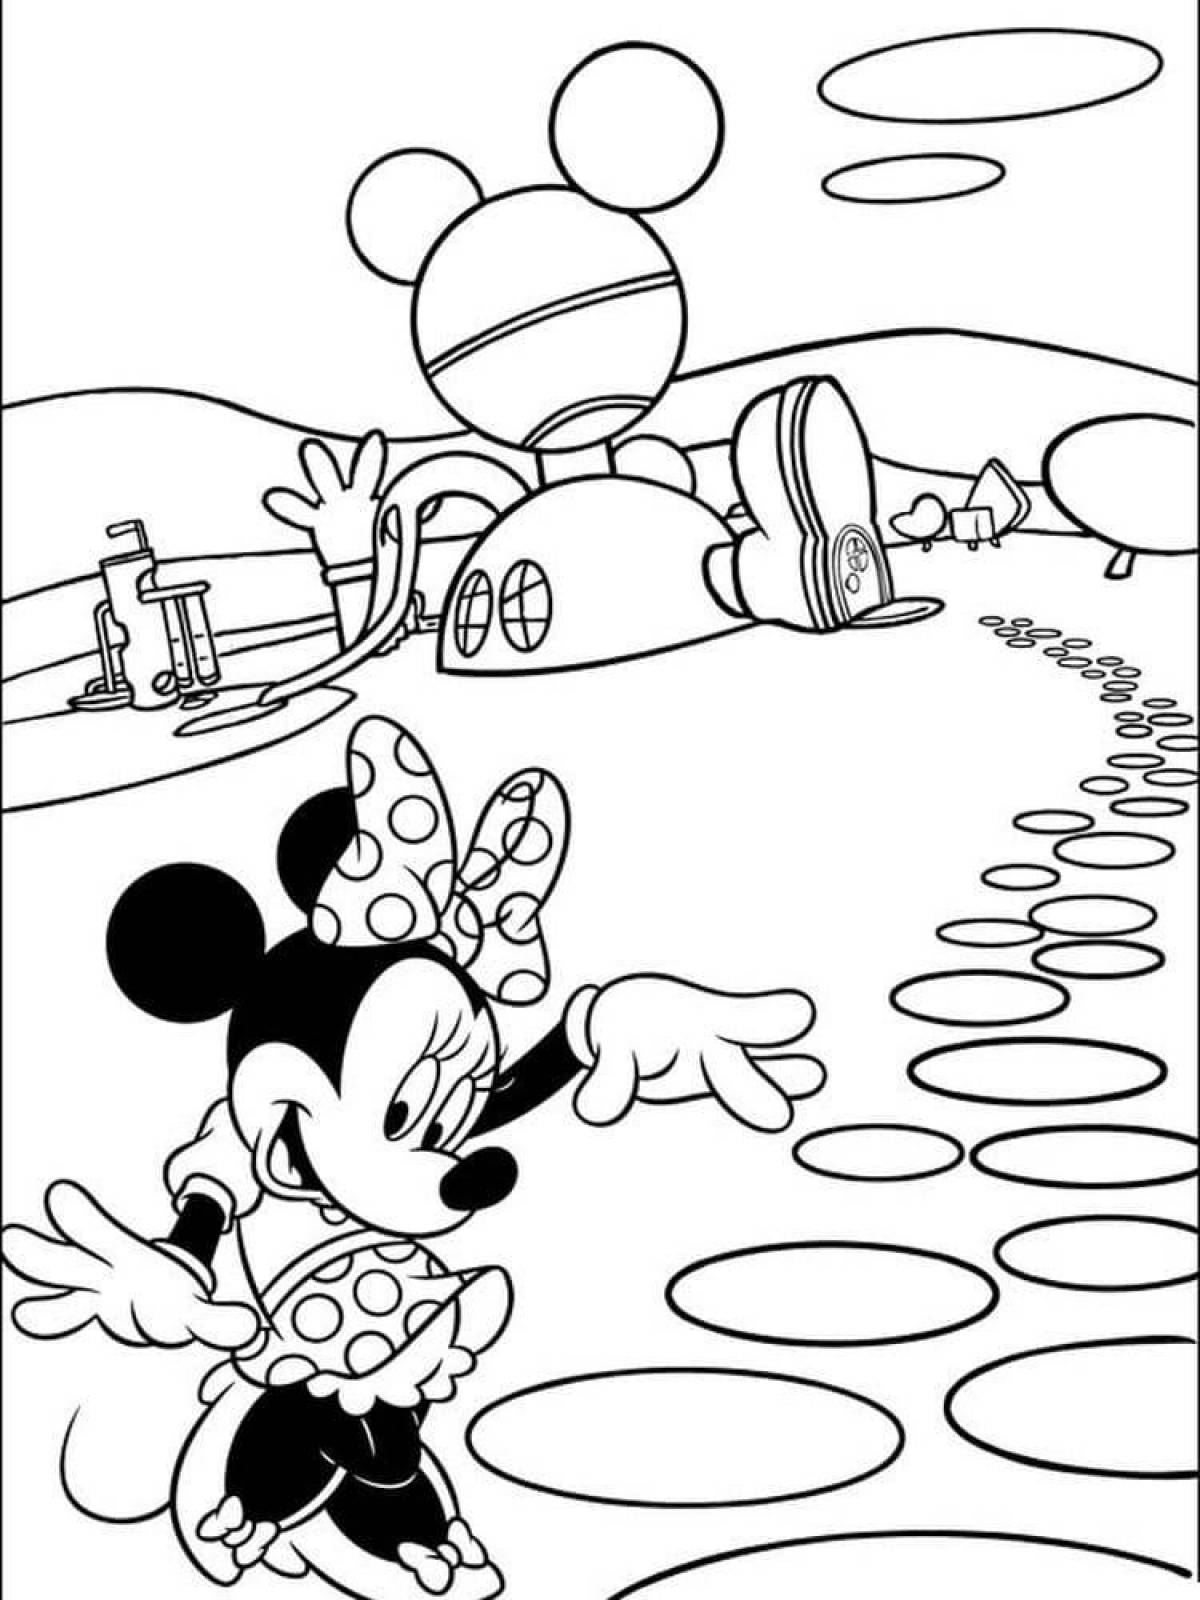 Fancy mickey mouse coloring book for girls